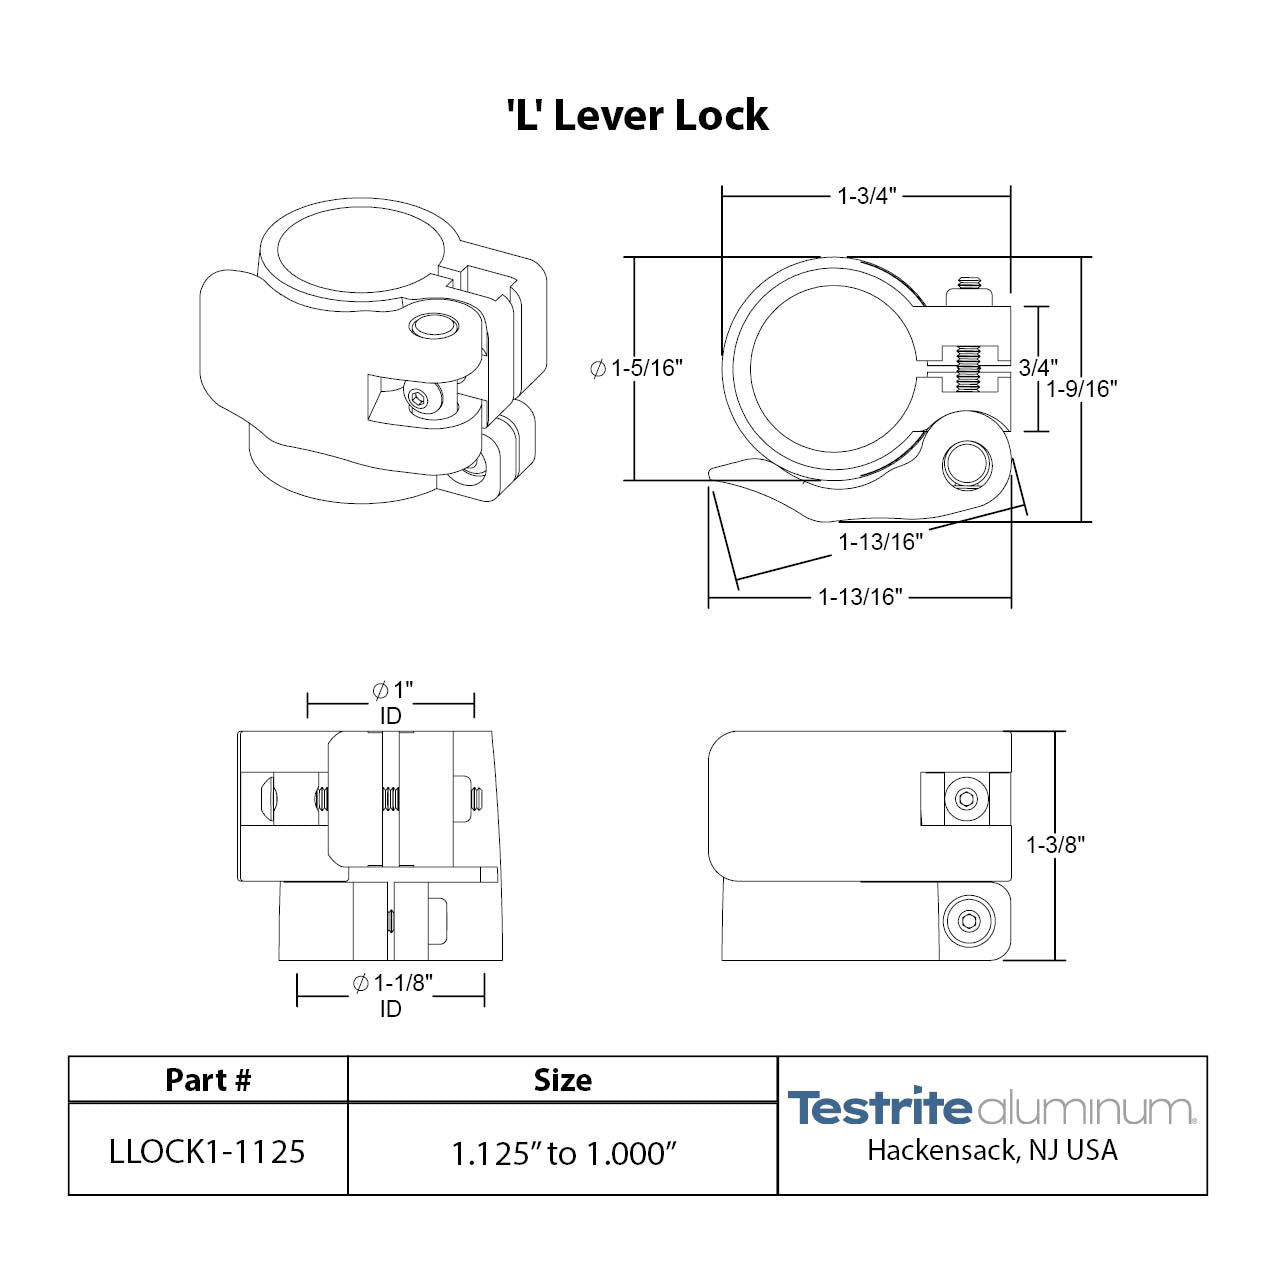 Specification sheet for LLOCK1000-1125, Telescopic Tubing Lock for 1" to 1-1/8"